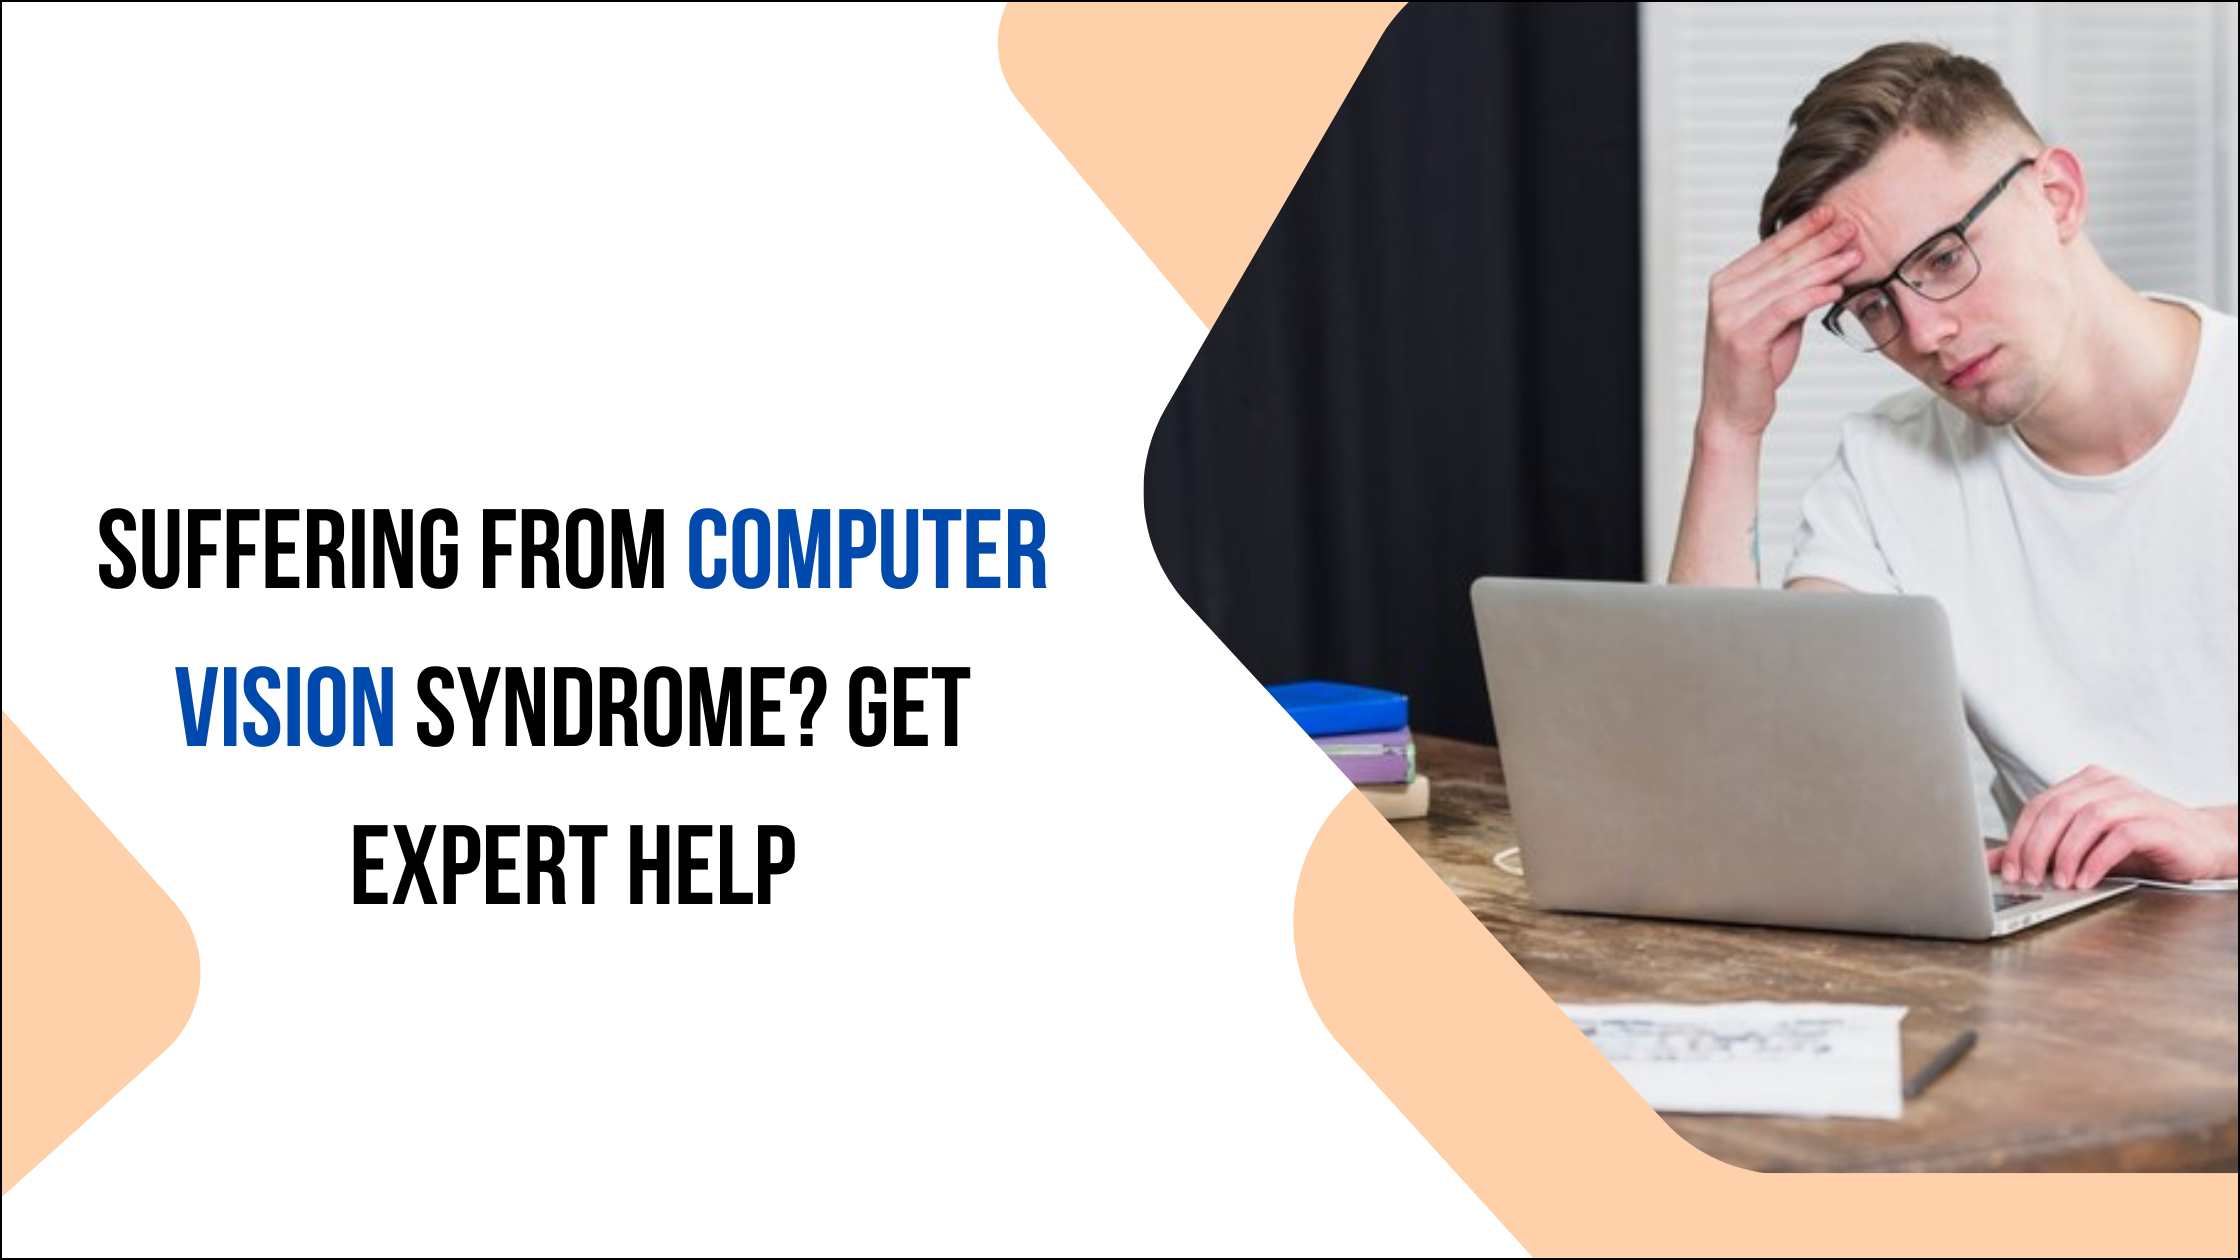 Suffering from Computer Vision Syndrome? Get Expert Help